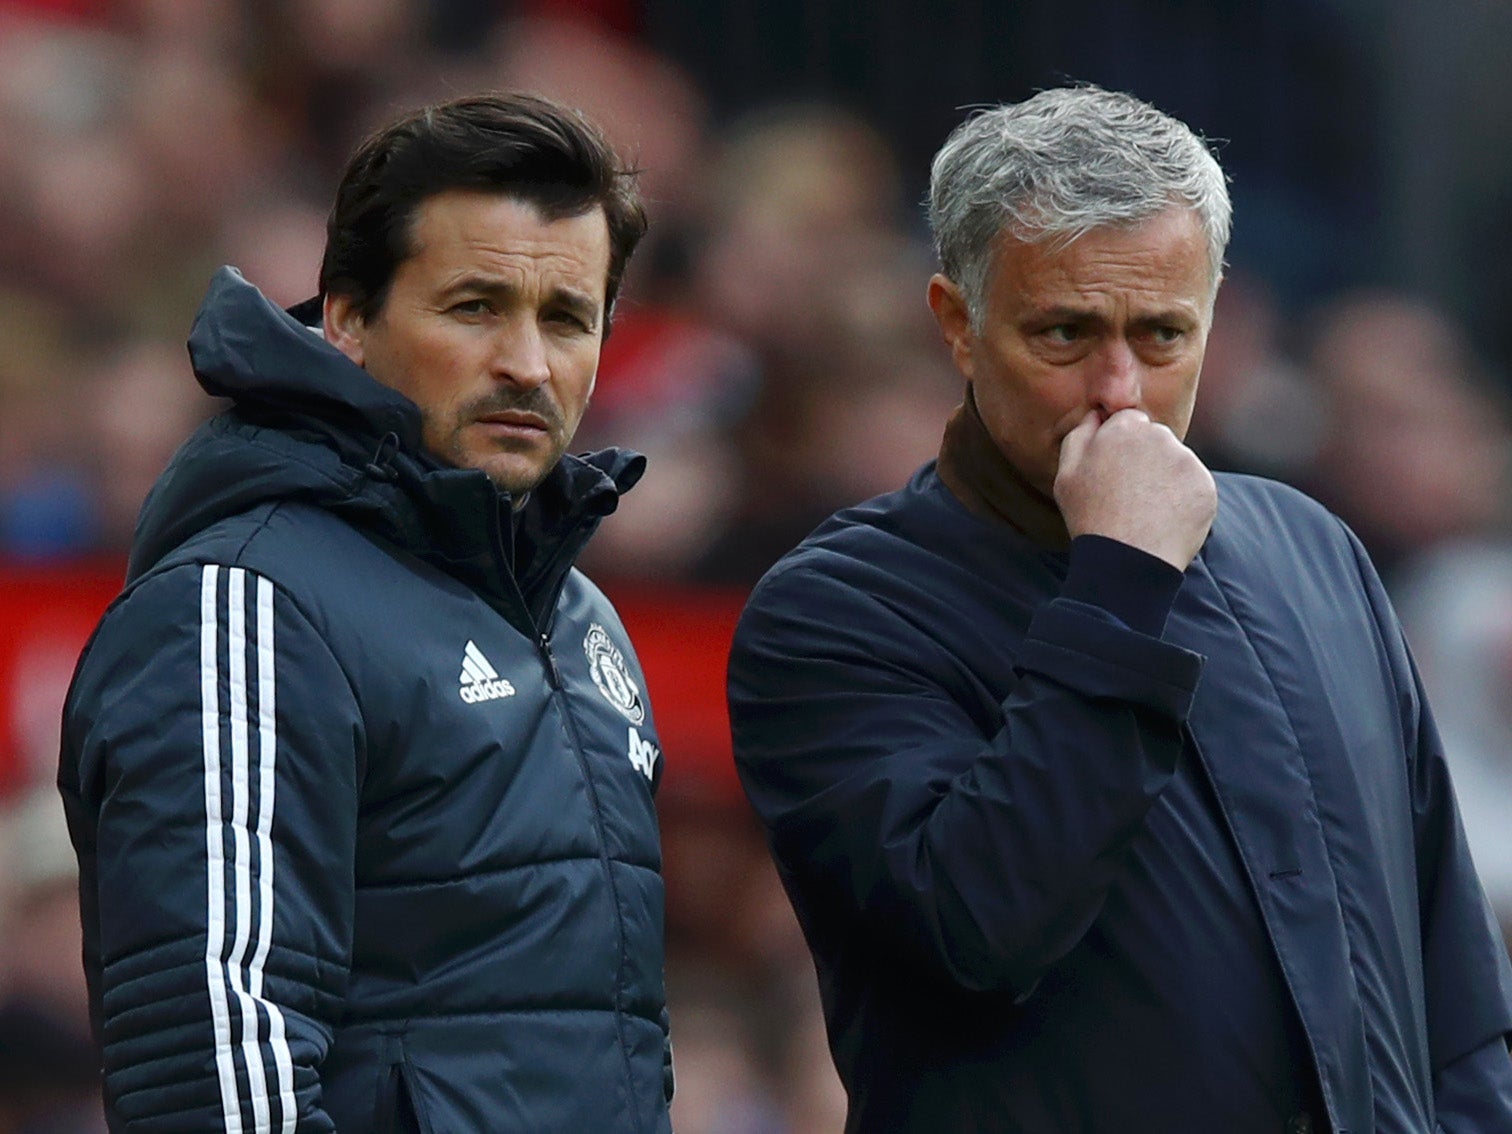 Rui Faria wants to go into management